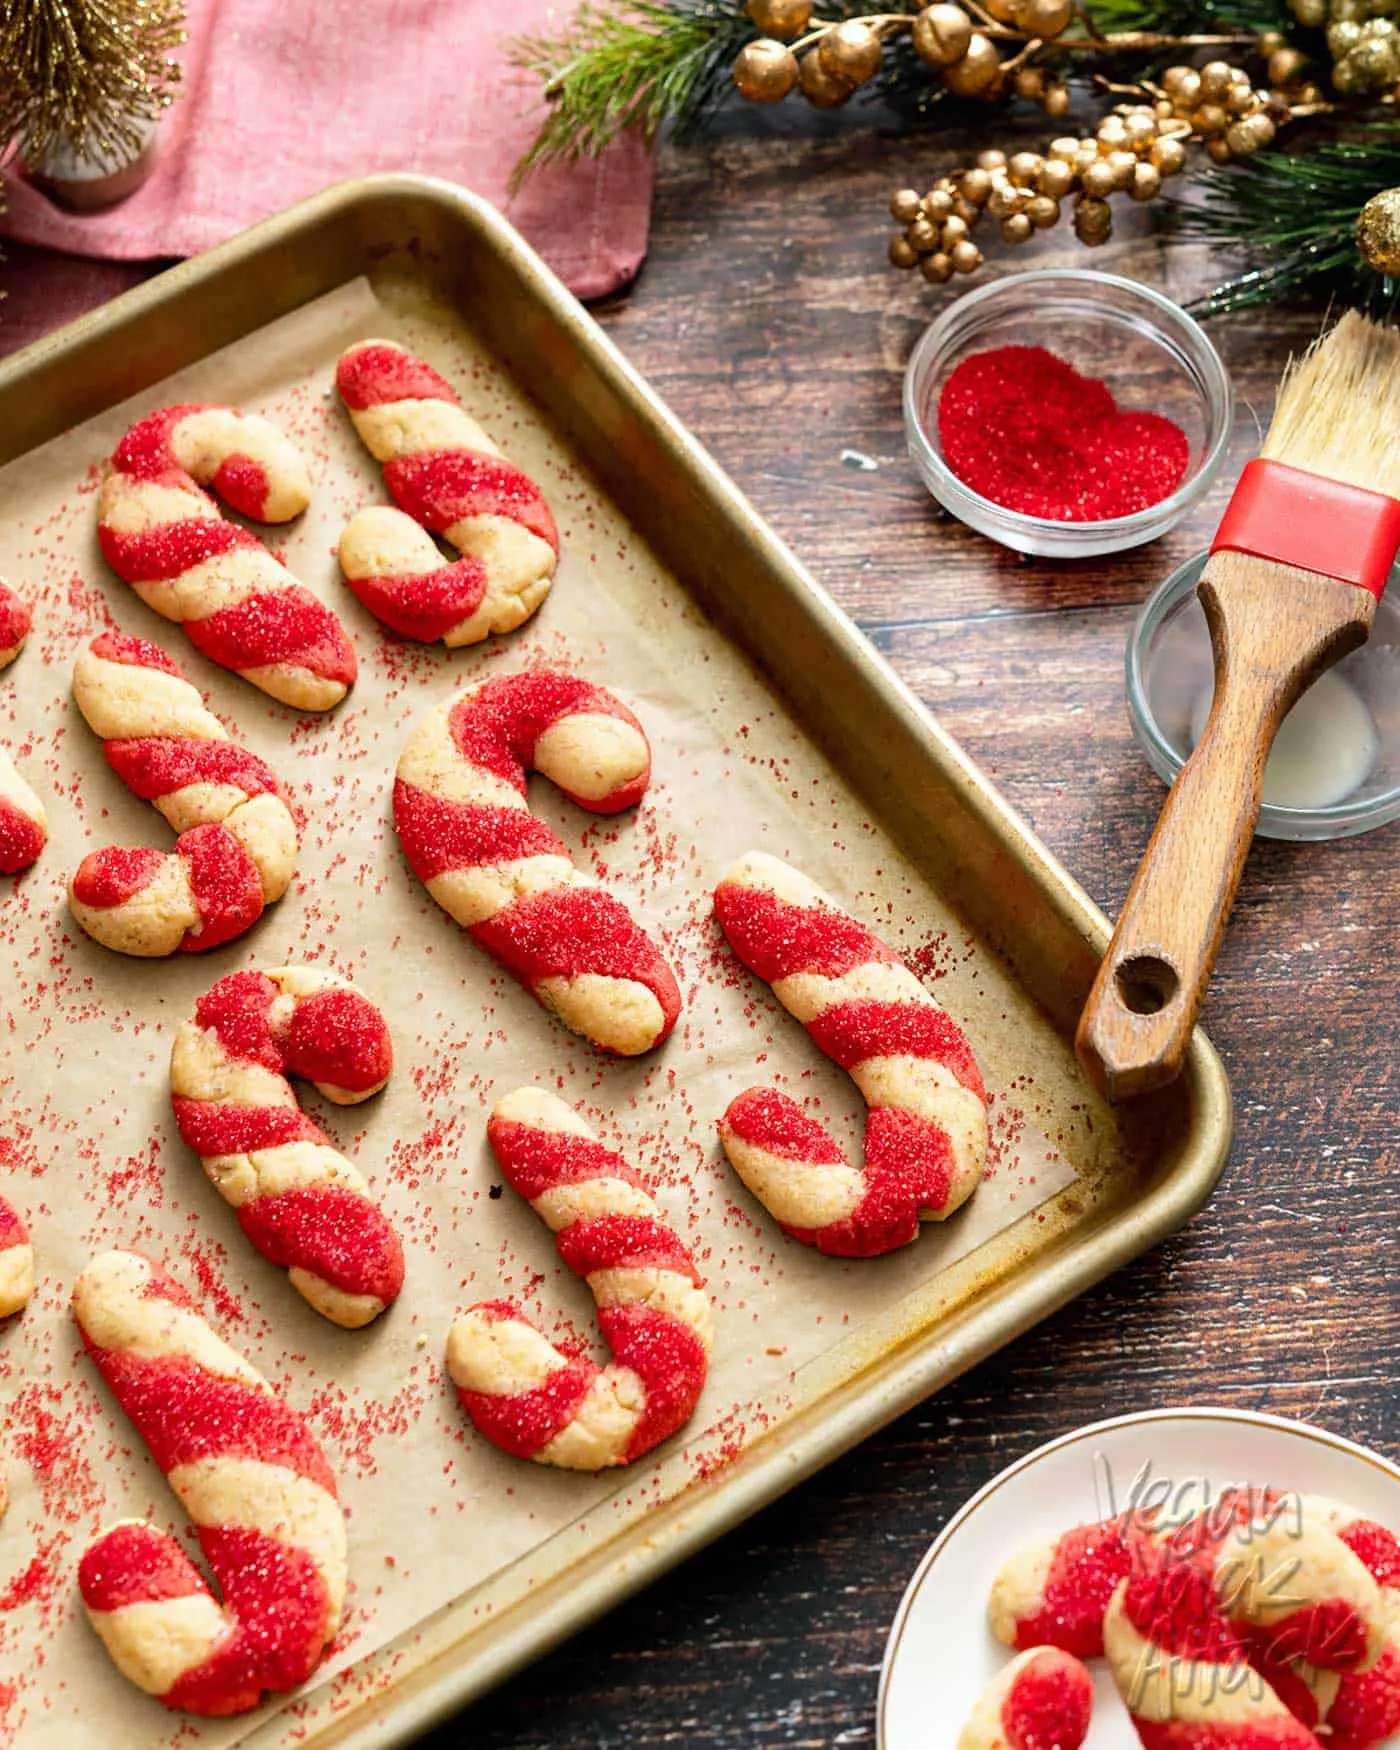 Candy cane-shaped cookies on a baking sheet next to colored sugar and pastry brush